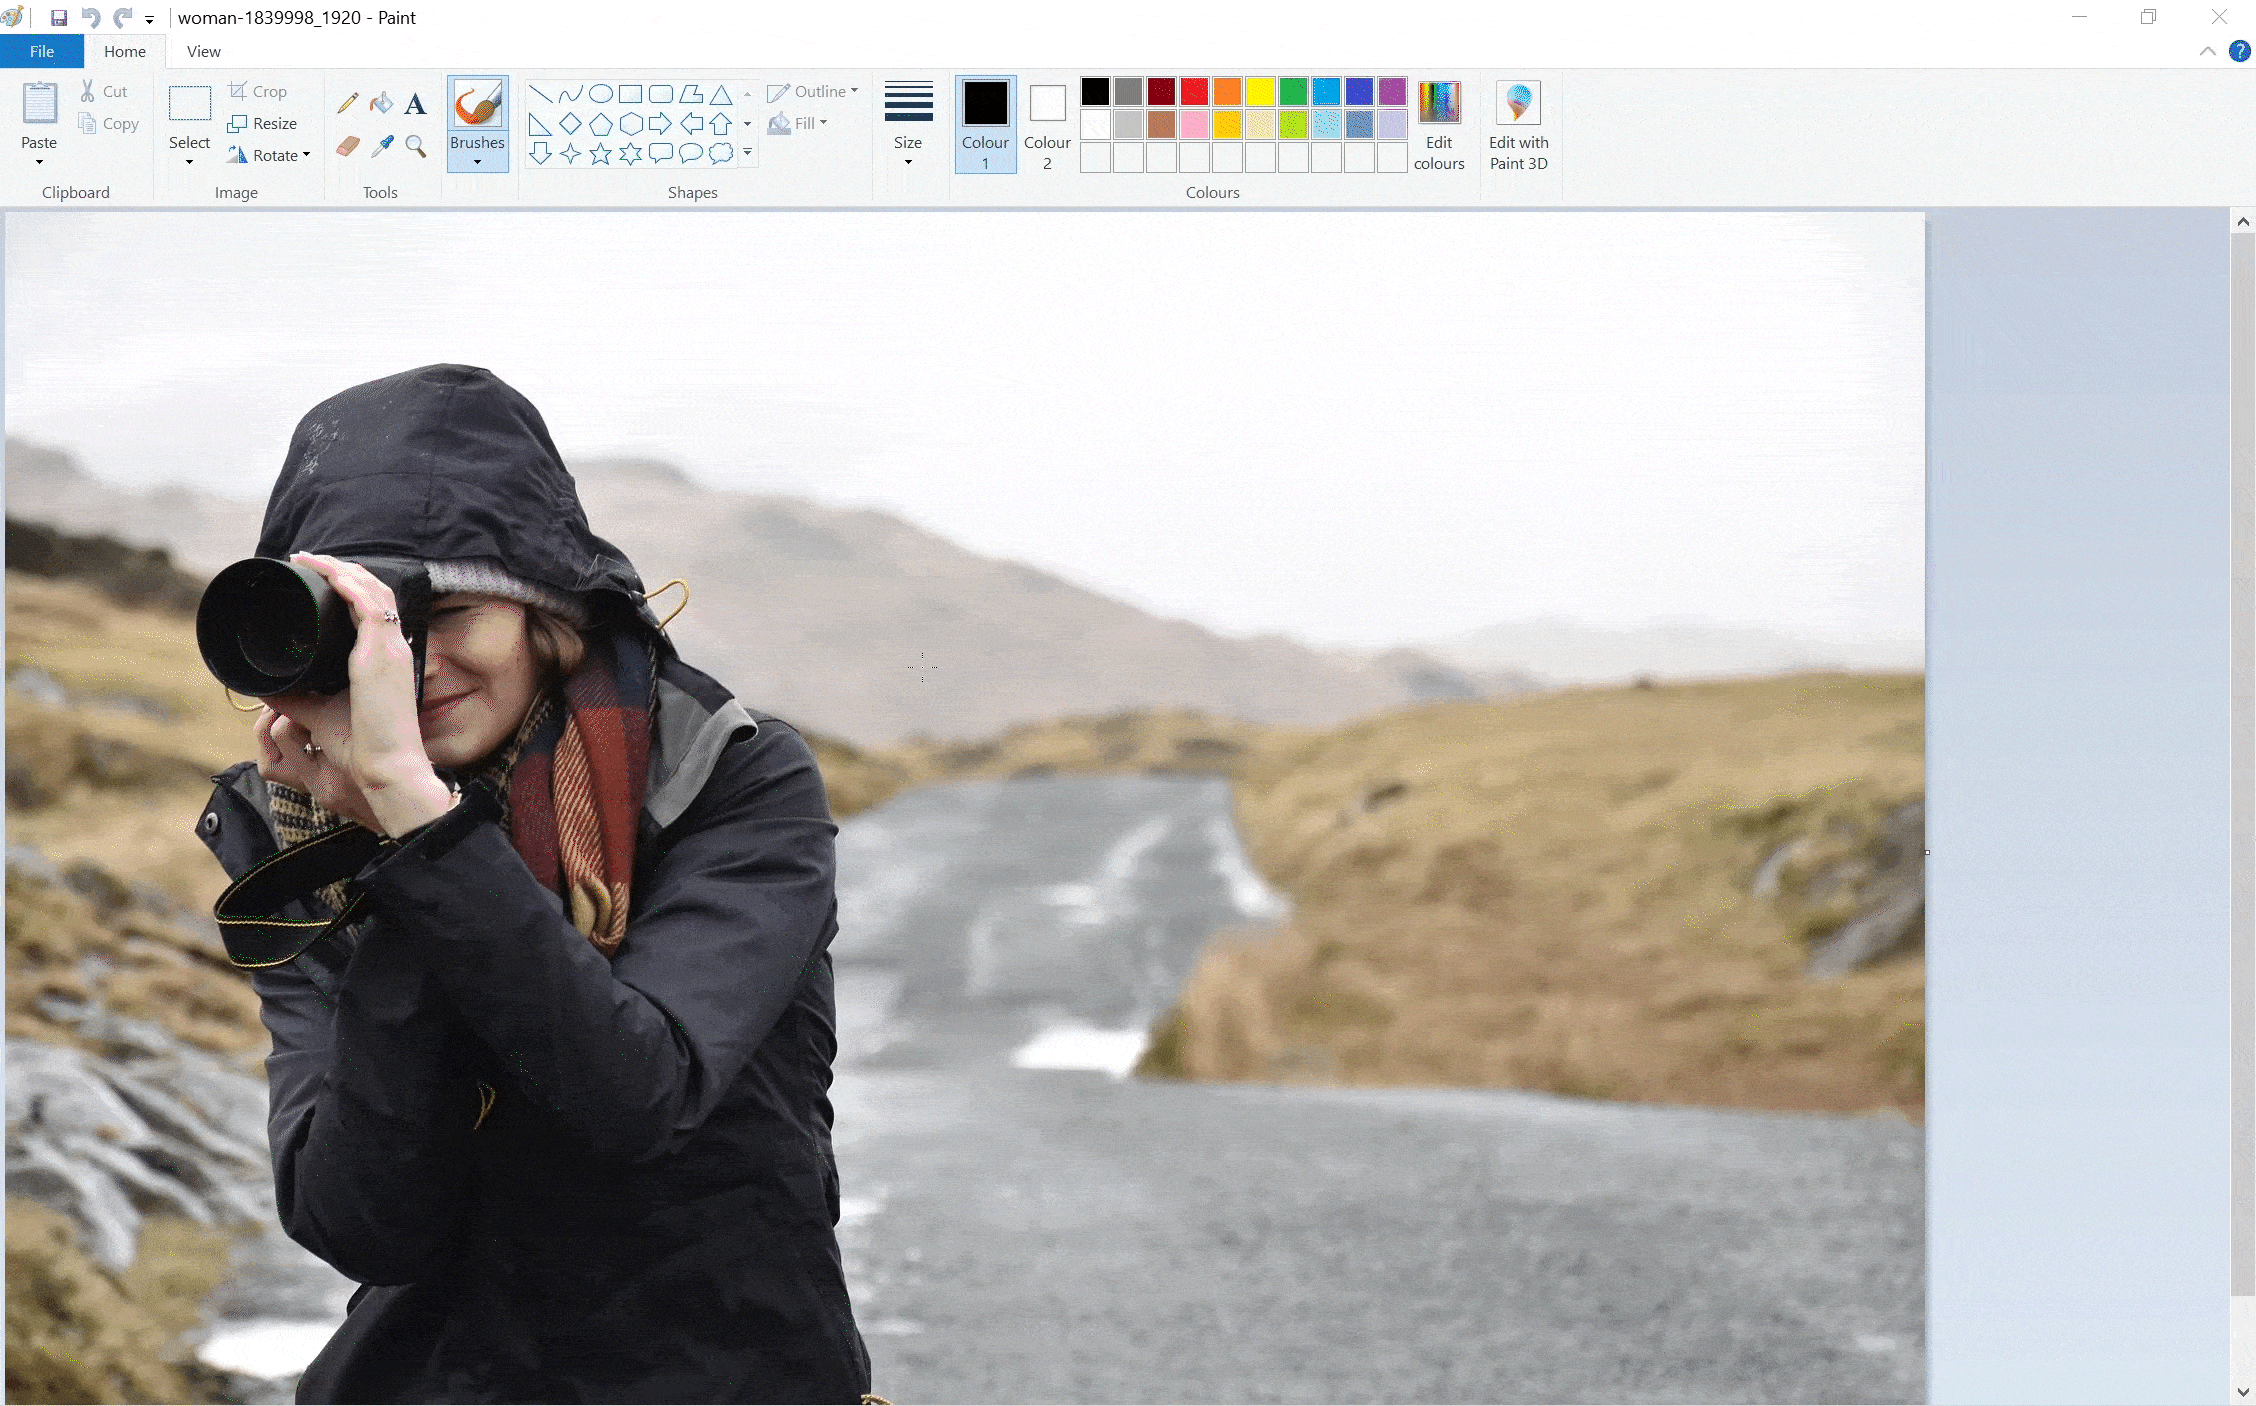 How to resize an image using paint